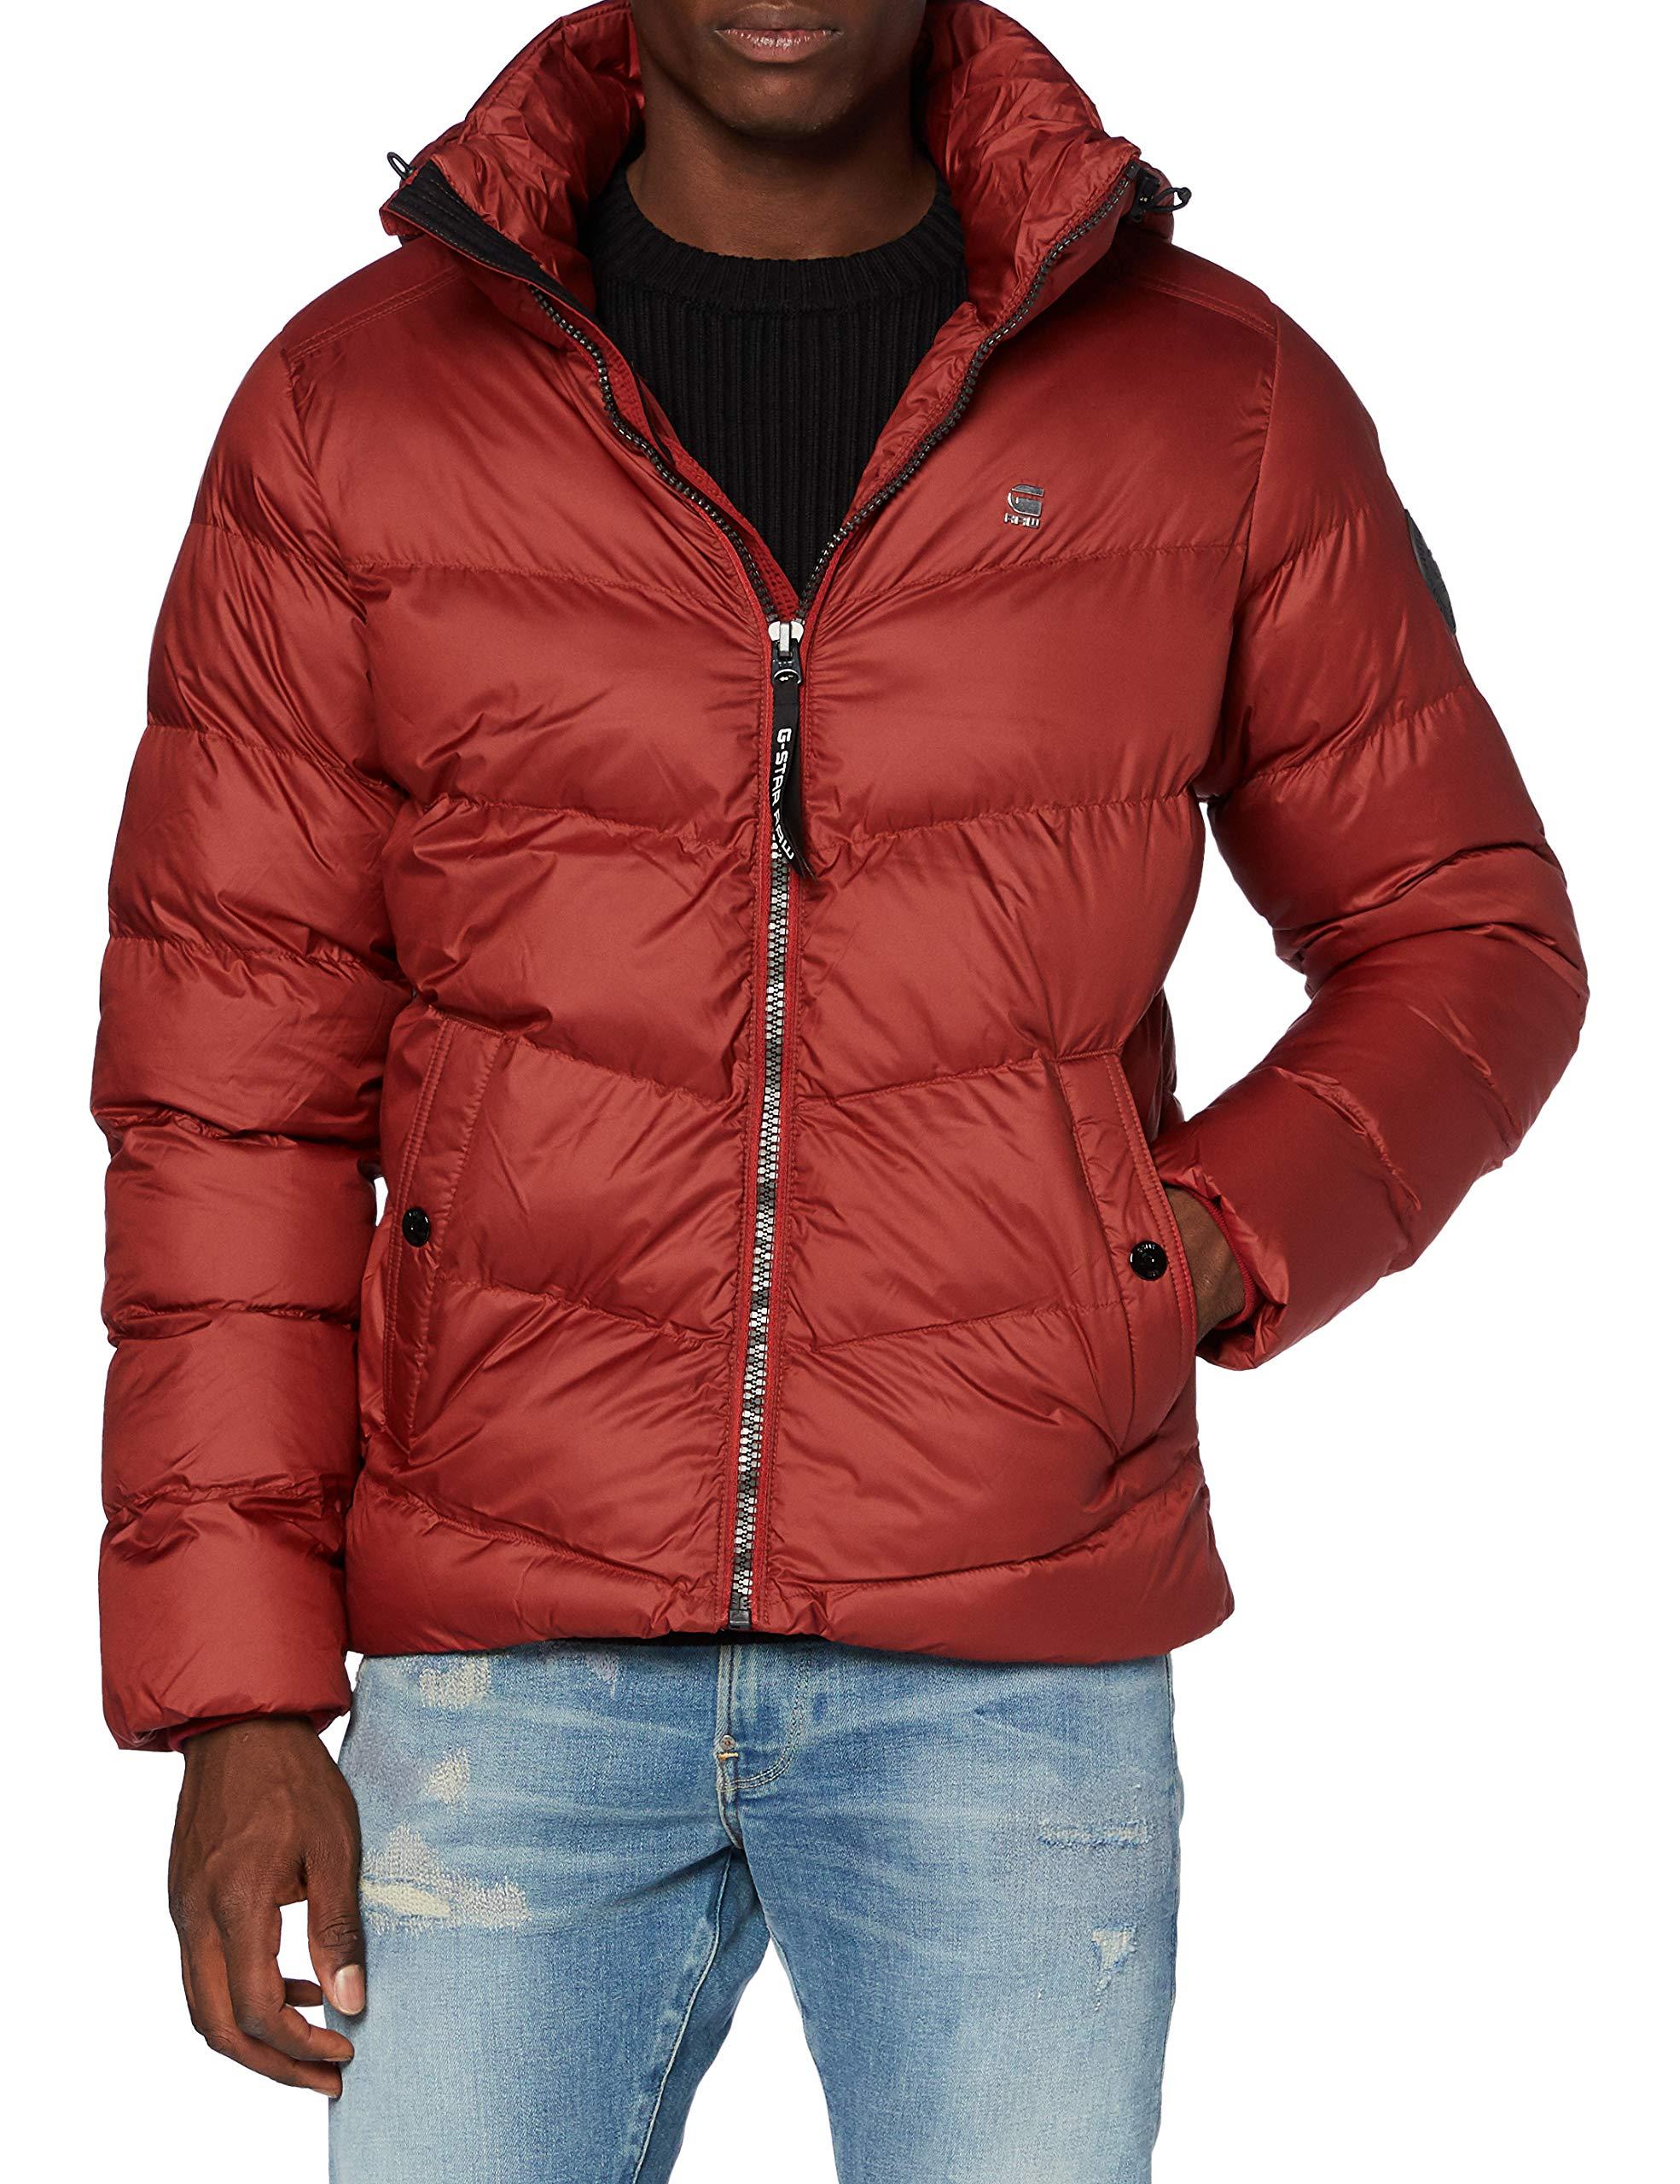 G-Star RAW Whistler Hdd Puffer Jacket in Red for Men - Save 55% | Lyst UK